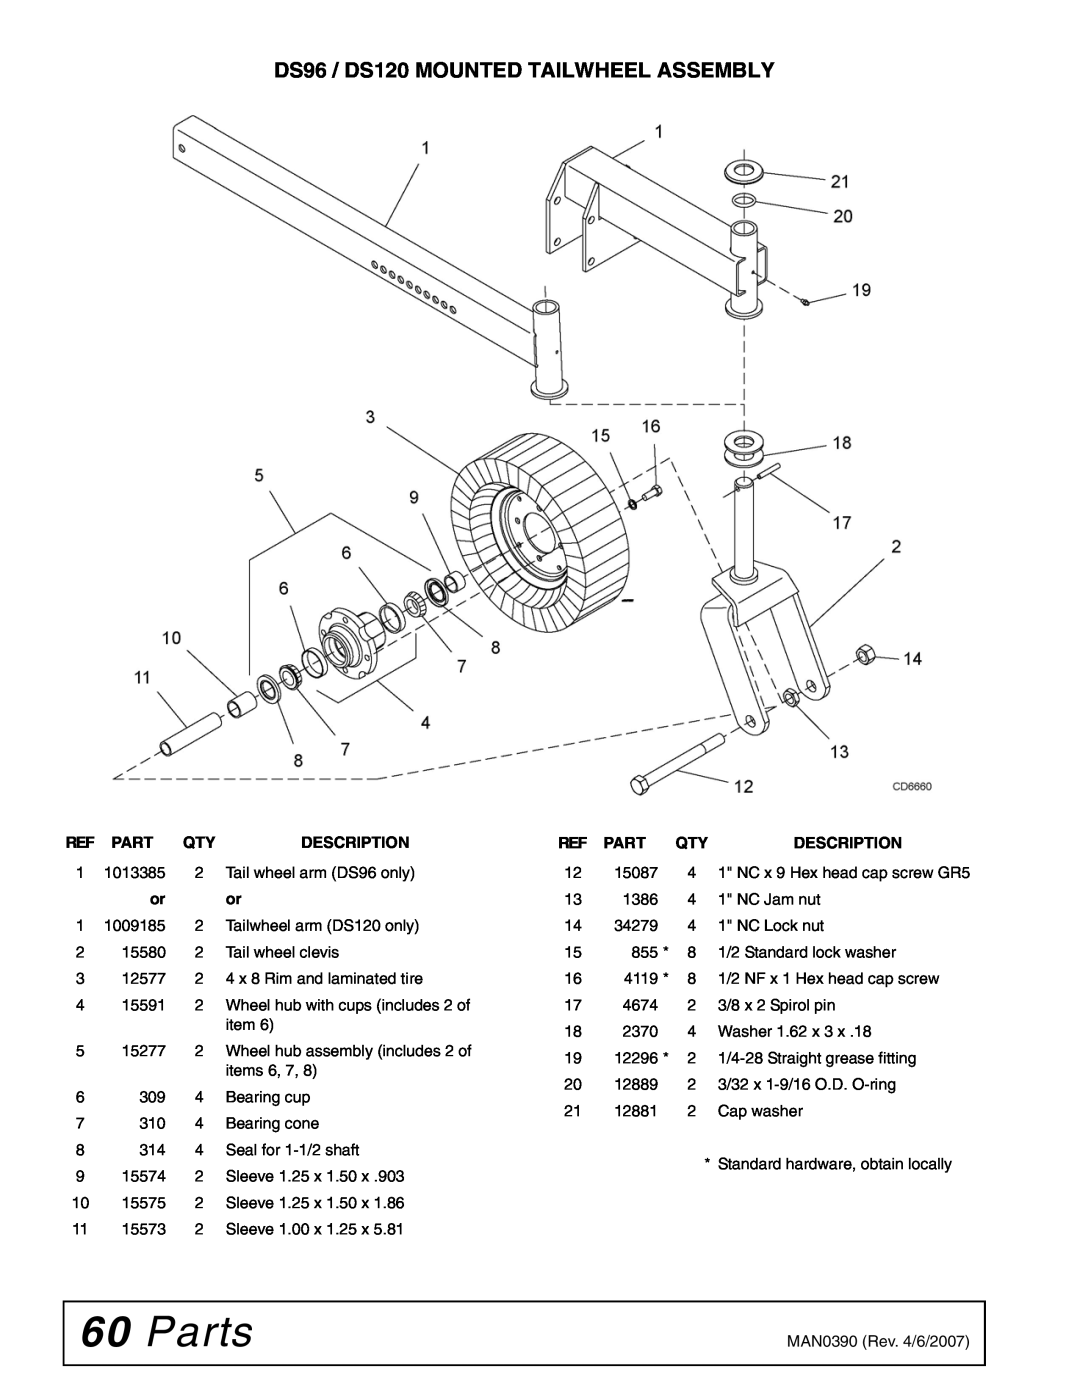 Woods Equipment manual Parts, DS96 / DS120 MOUNTED TAILWHEEL ASSEMBLY, Description 